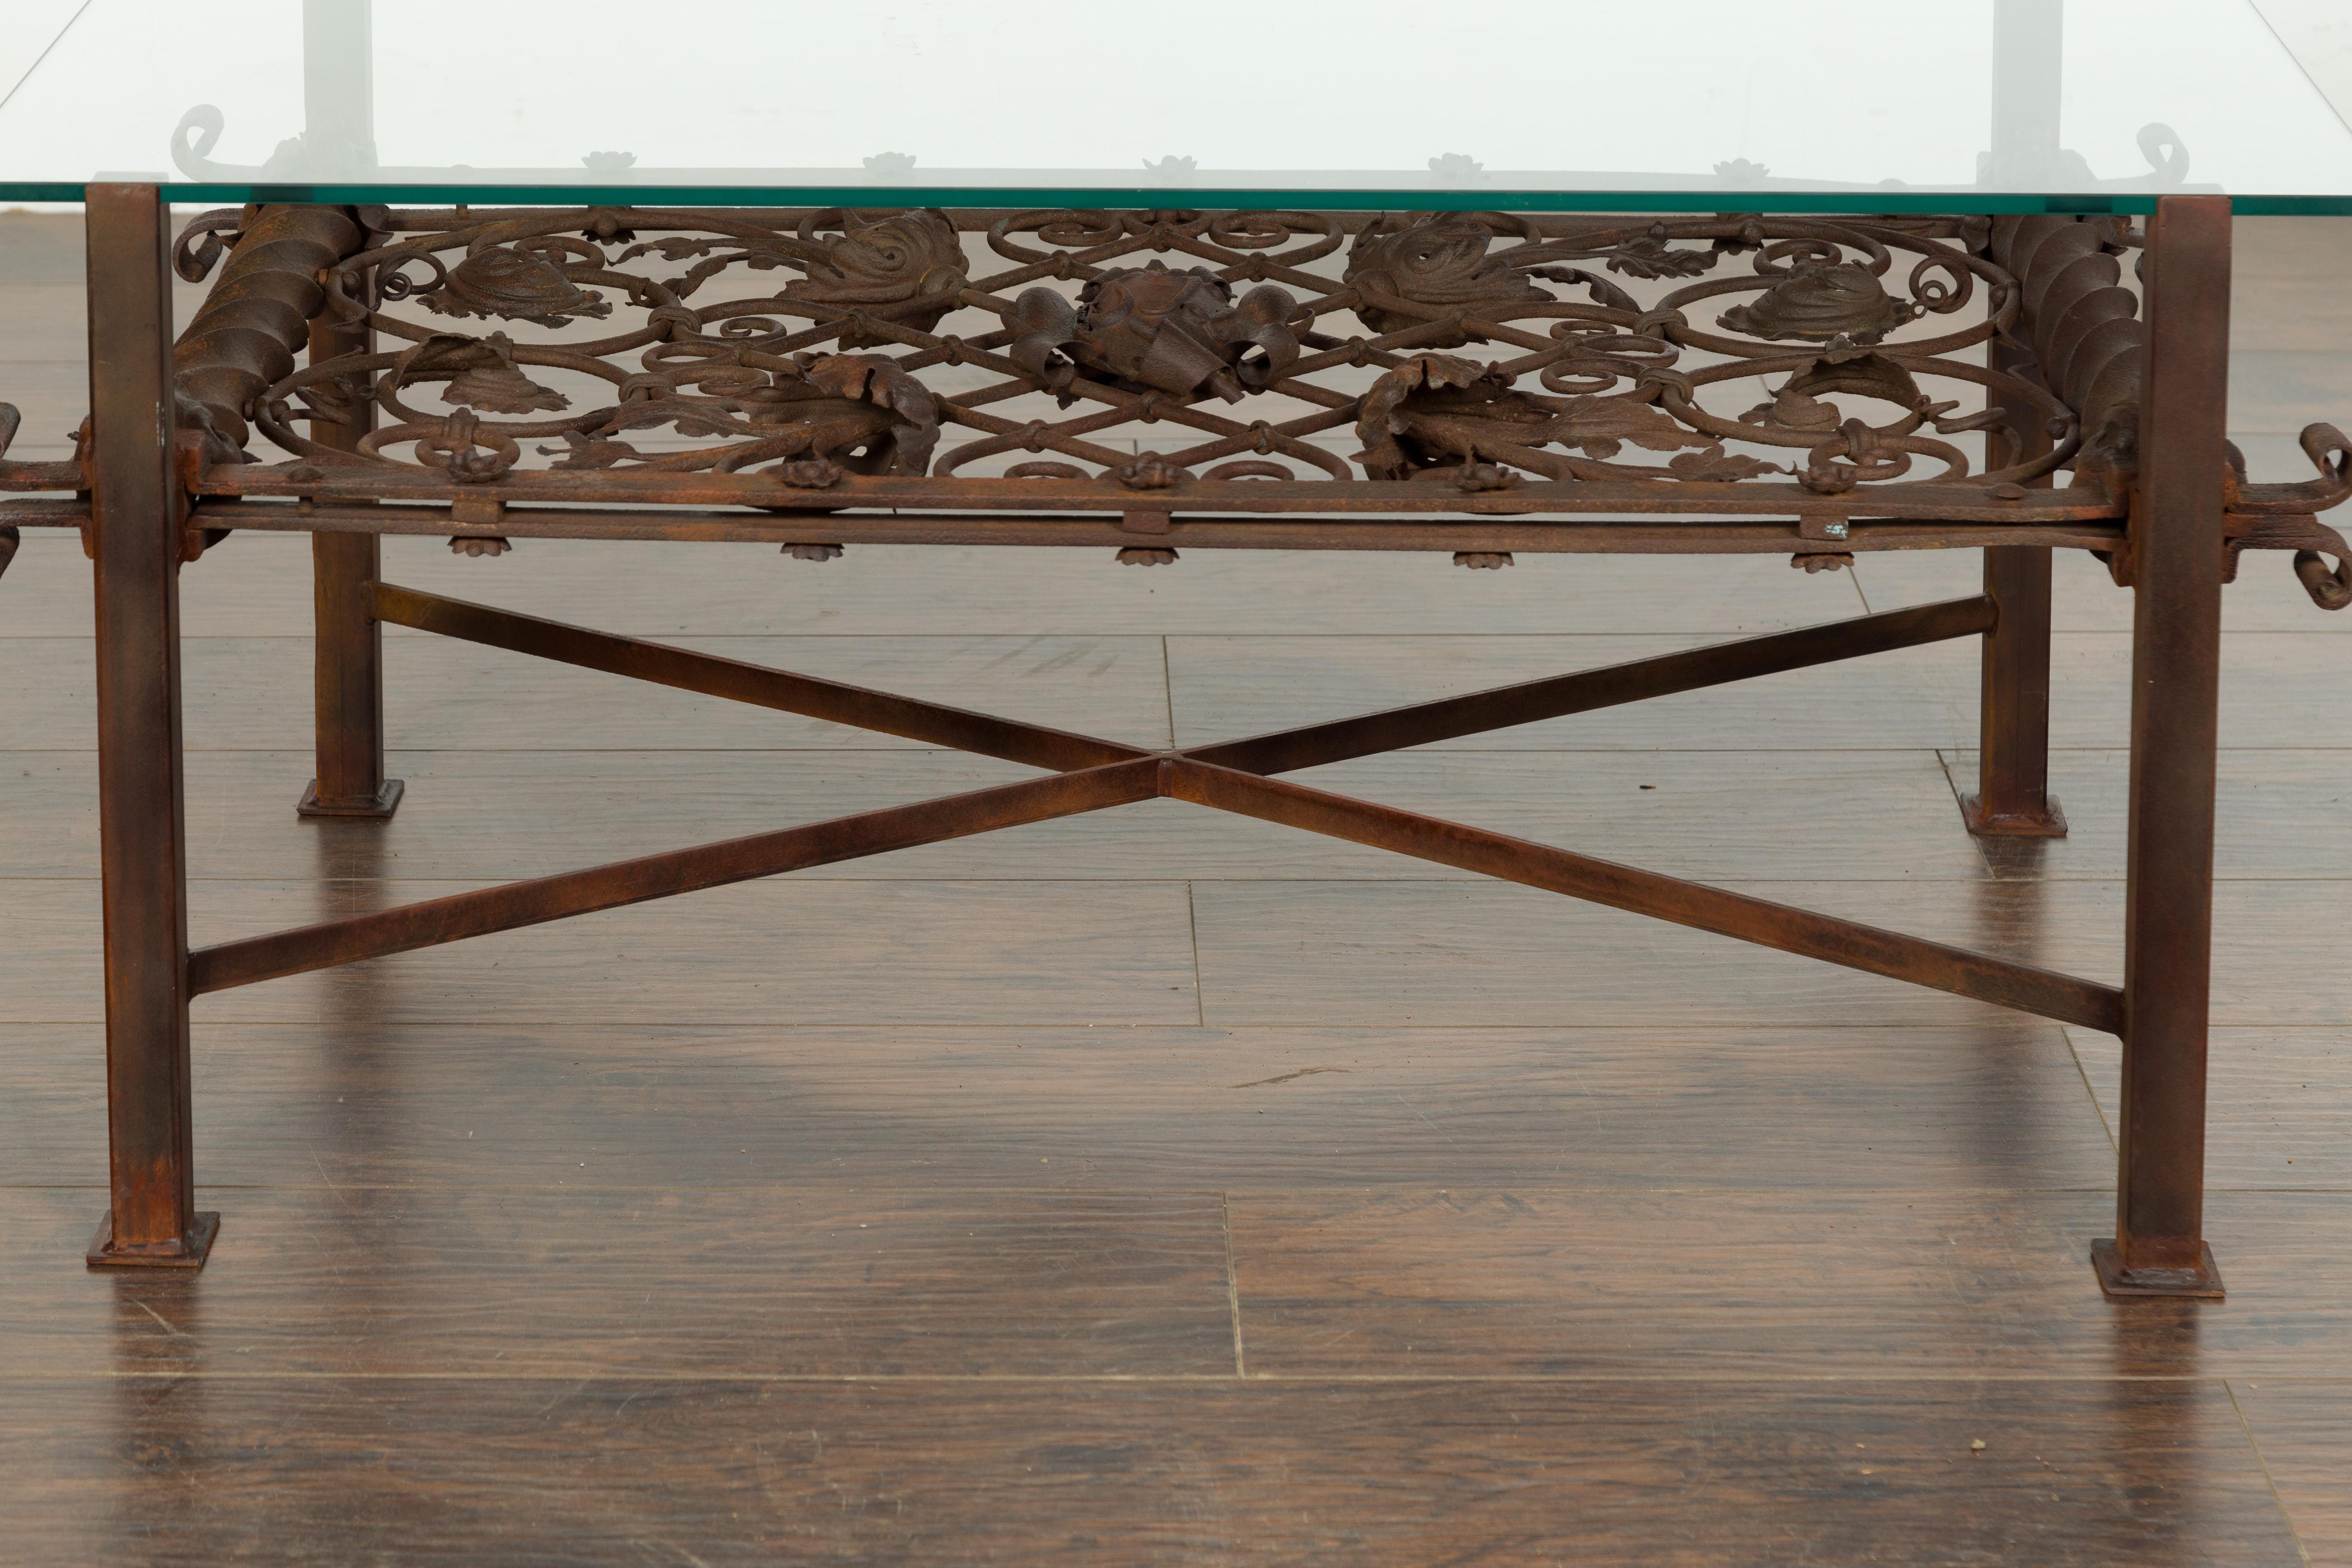 19th Century French 1892 Iron Balcony Fragment Made into a Coffee Table with Glass Top For Sale